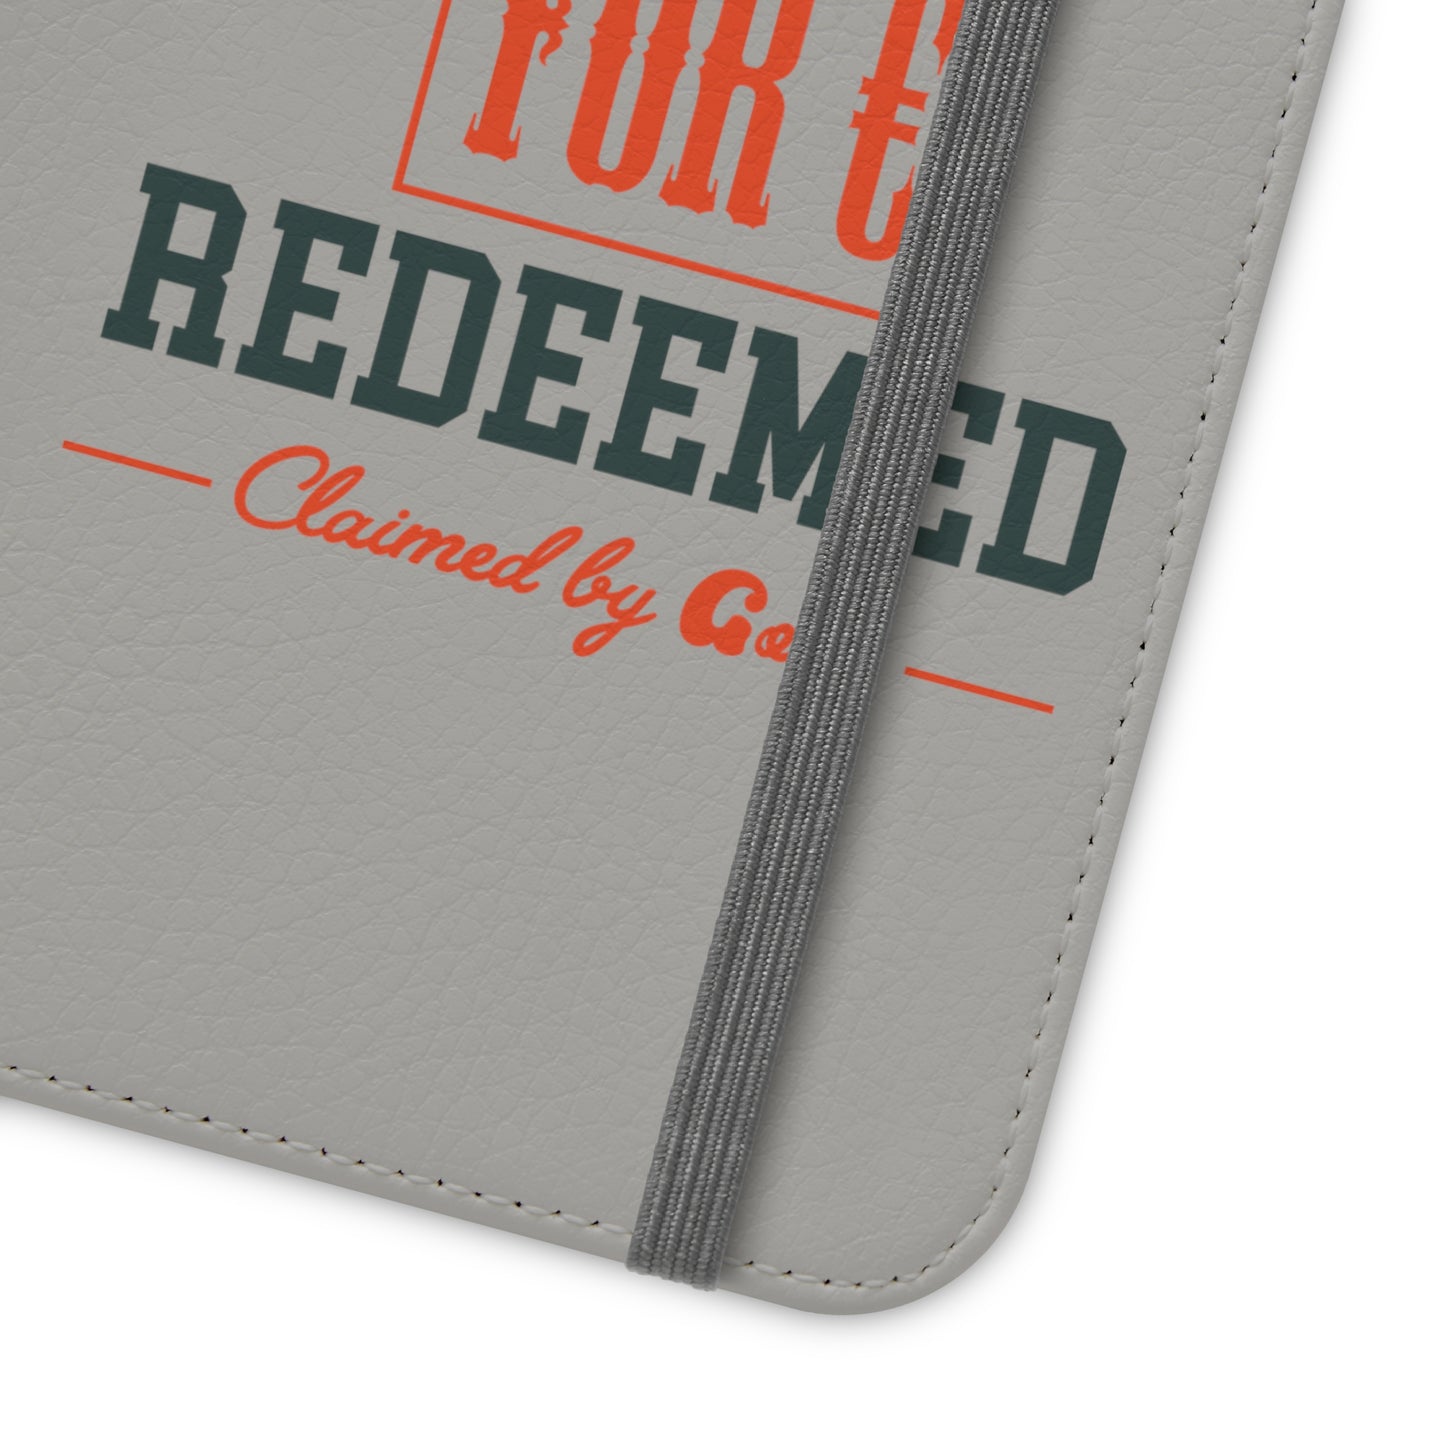 Fought For & Redeemed Phone Flip Cases